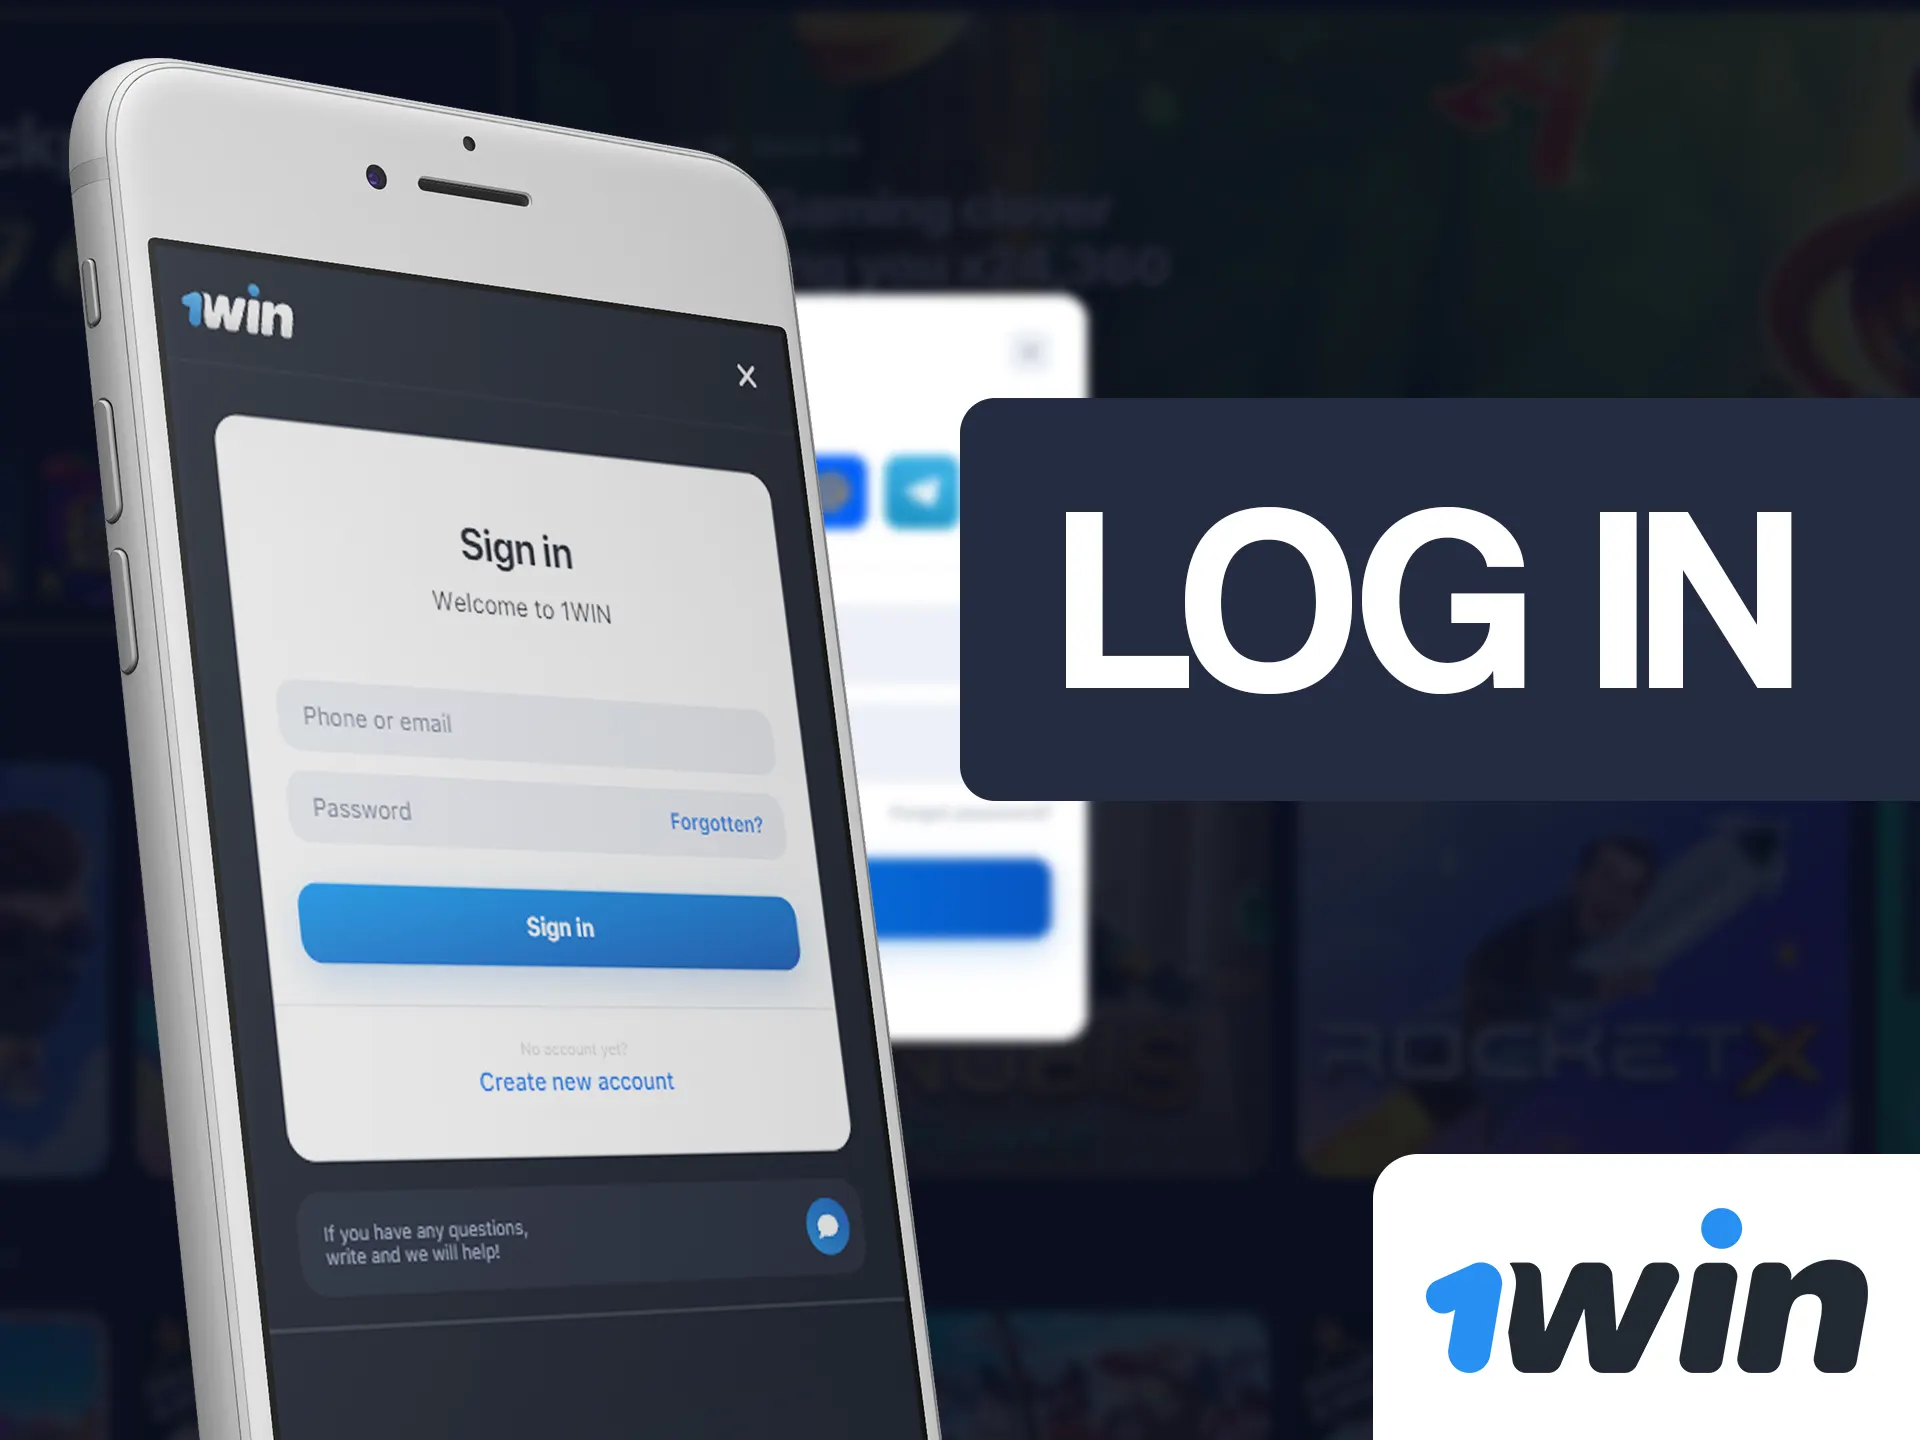 Enter your 1win account data for signing in.